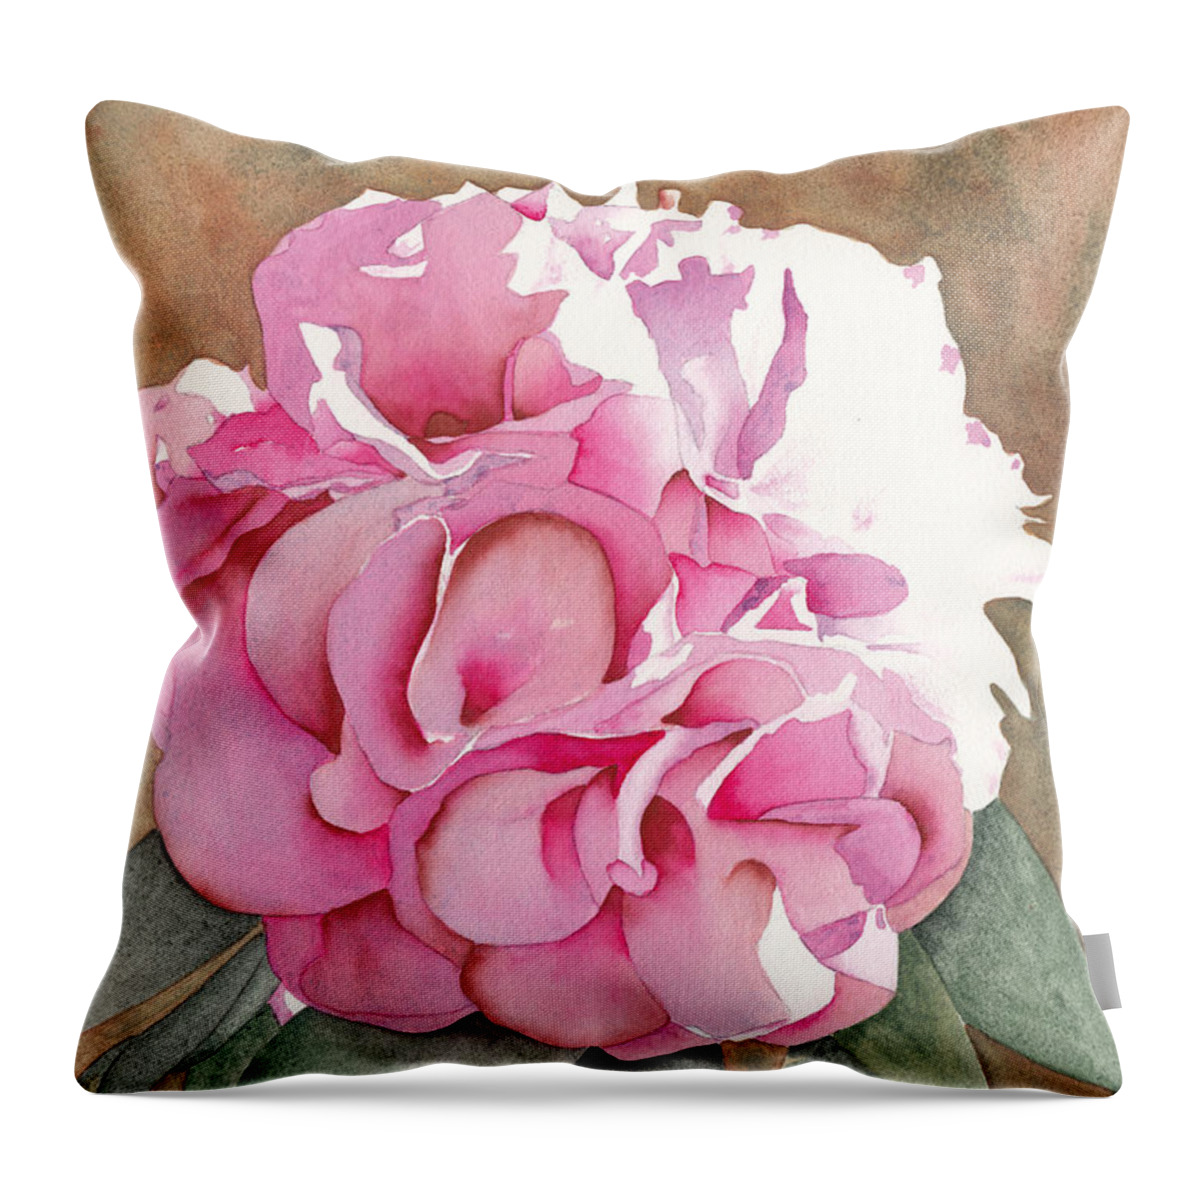 Pink Throw Pillow featuring the painting Pink Azalea by Ken Powers